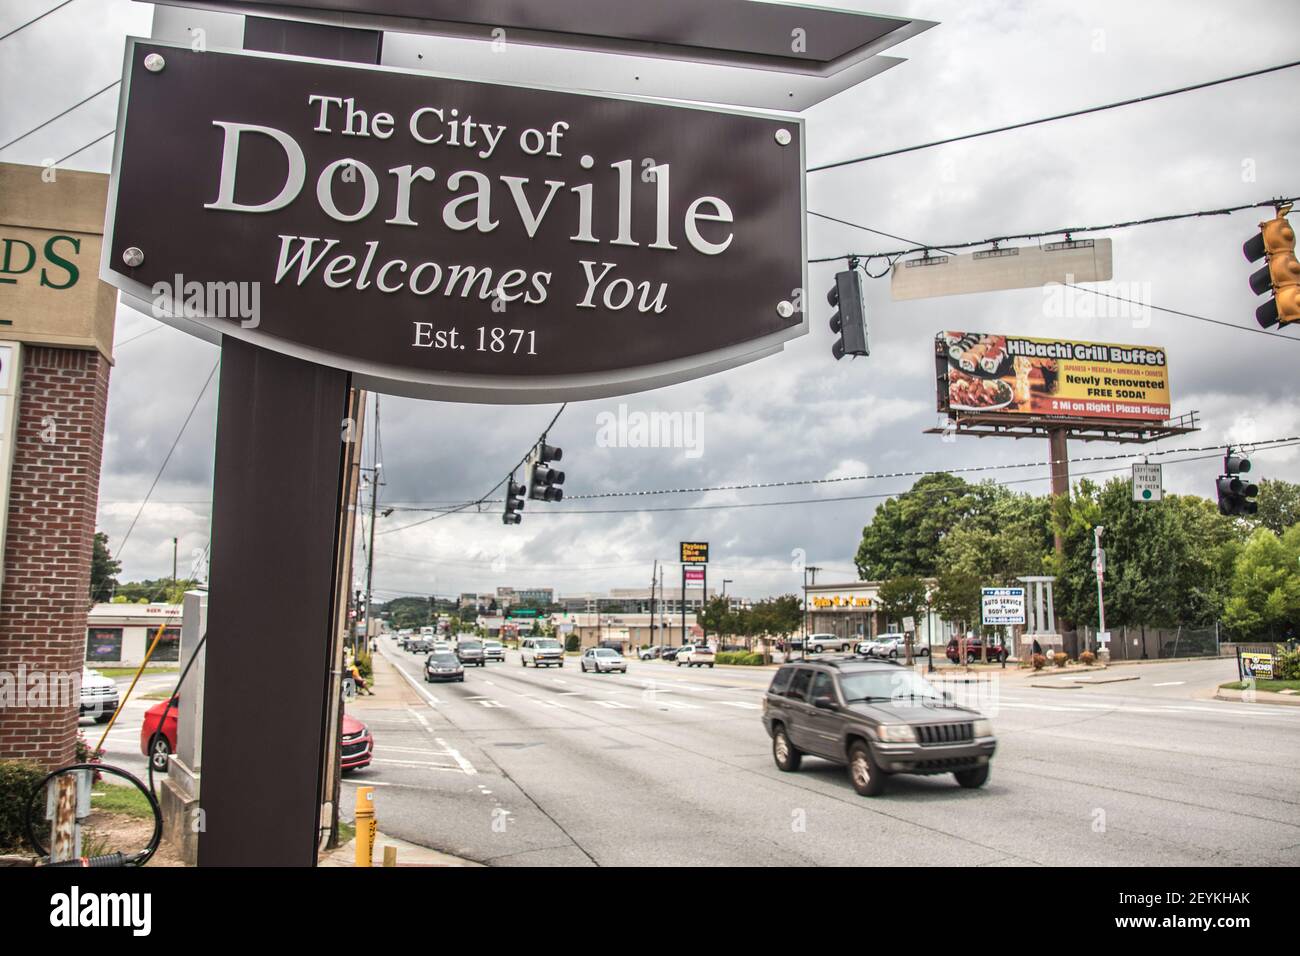 Doraville, Ga / USA - 07 06 20: View of a Welcome to Doraville sign with traffic and cloudy skies Stock Photo